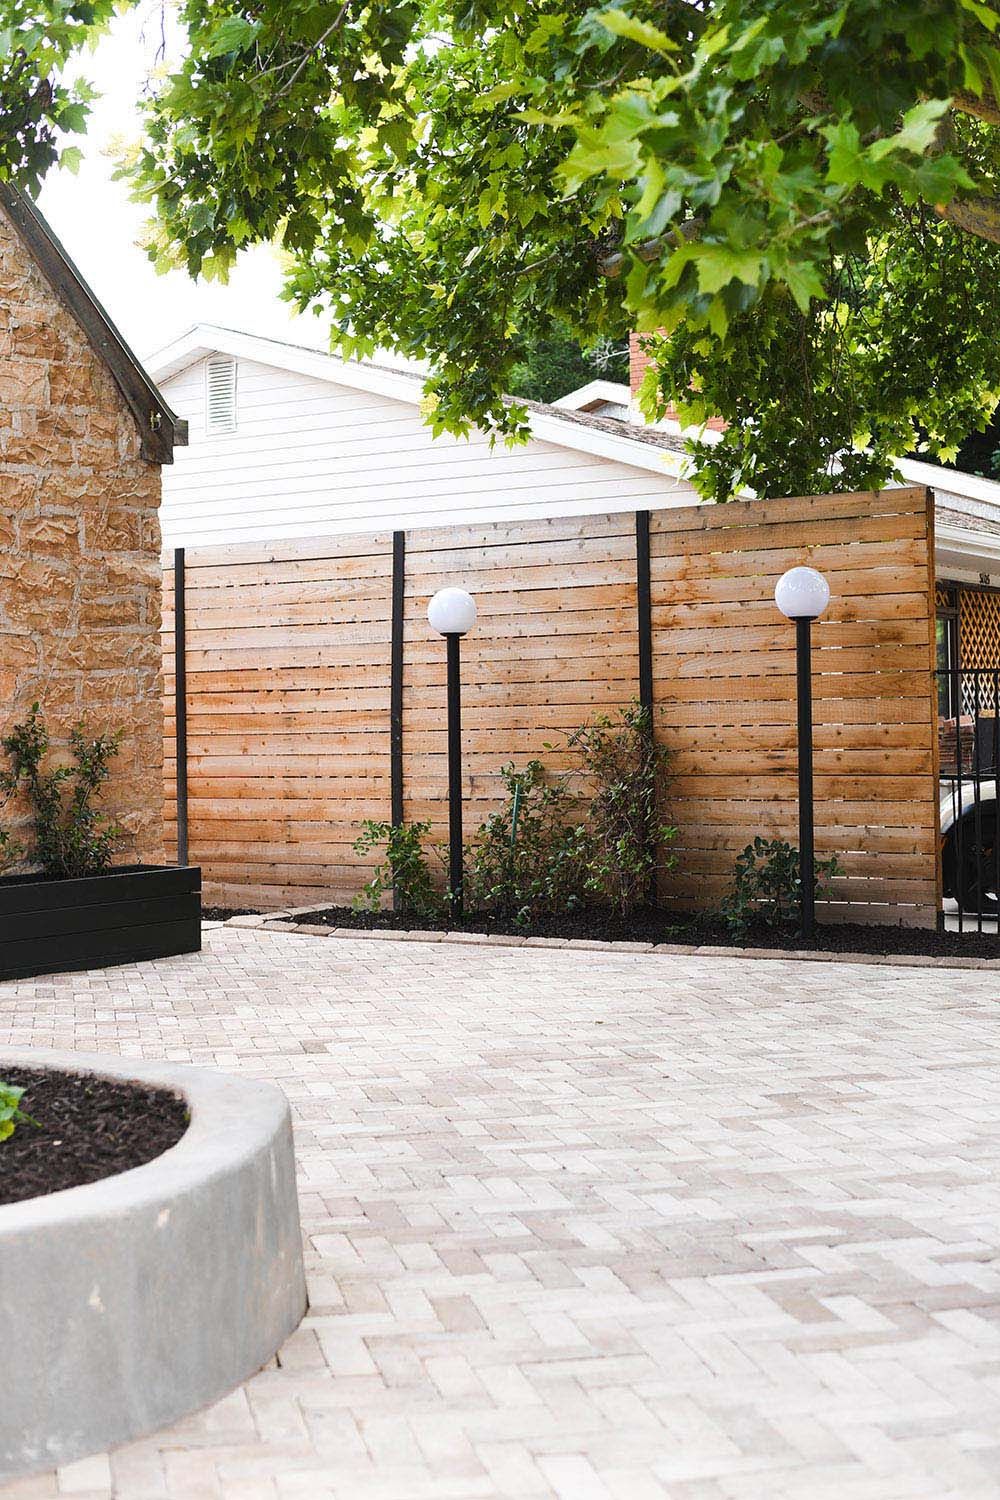 Stunning Paver Patio Designs to Transform Your Outdoor Space